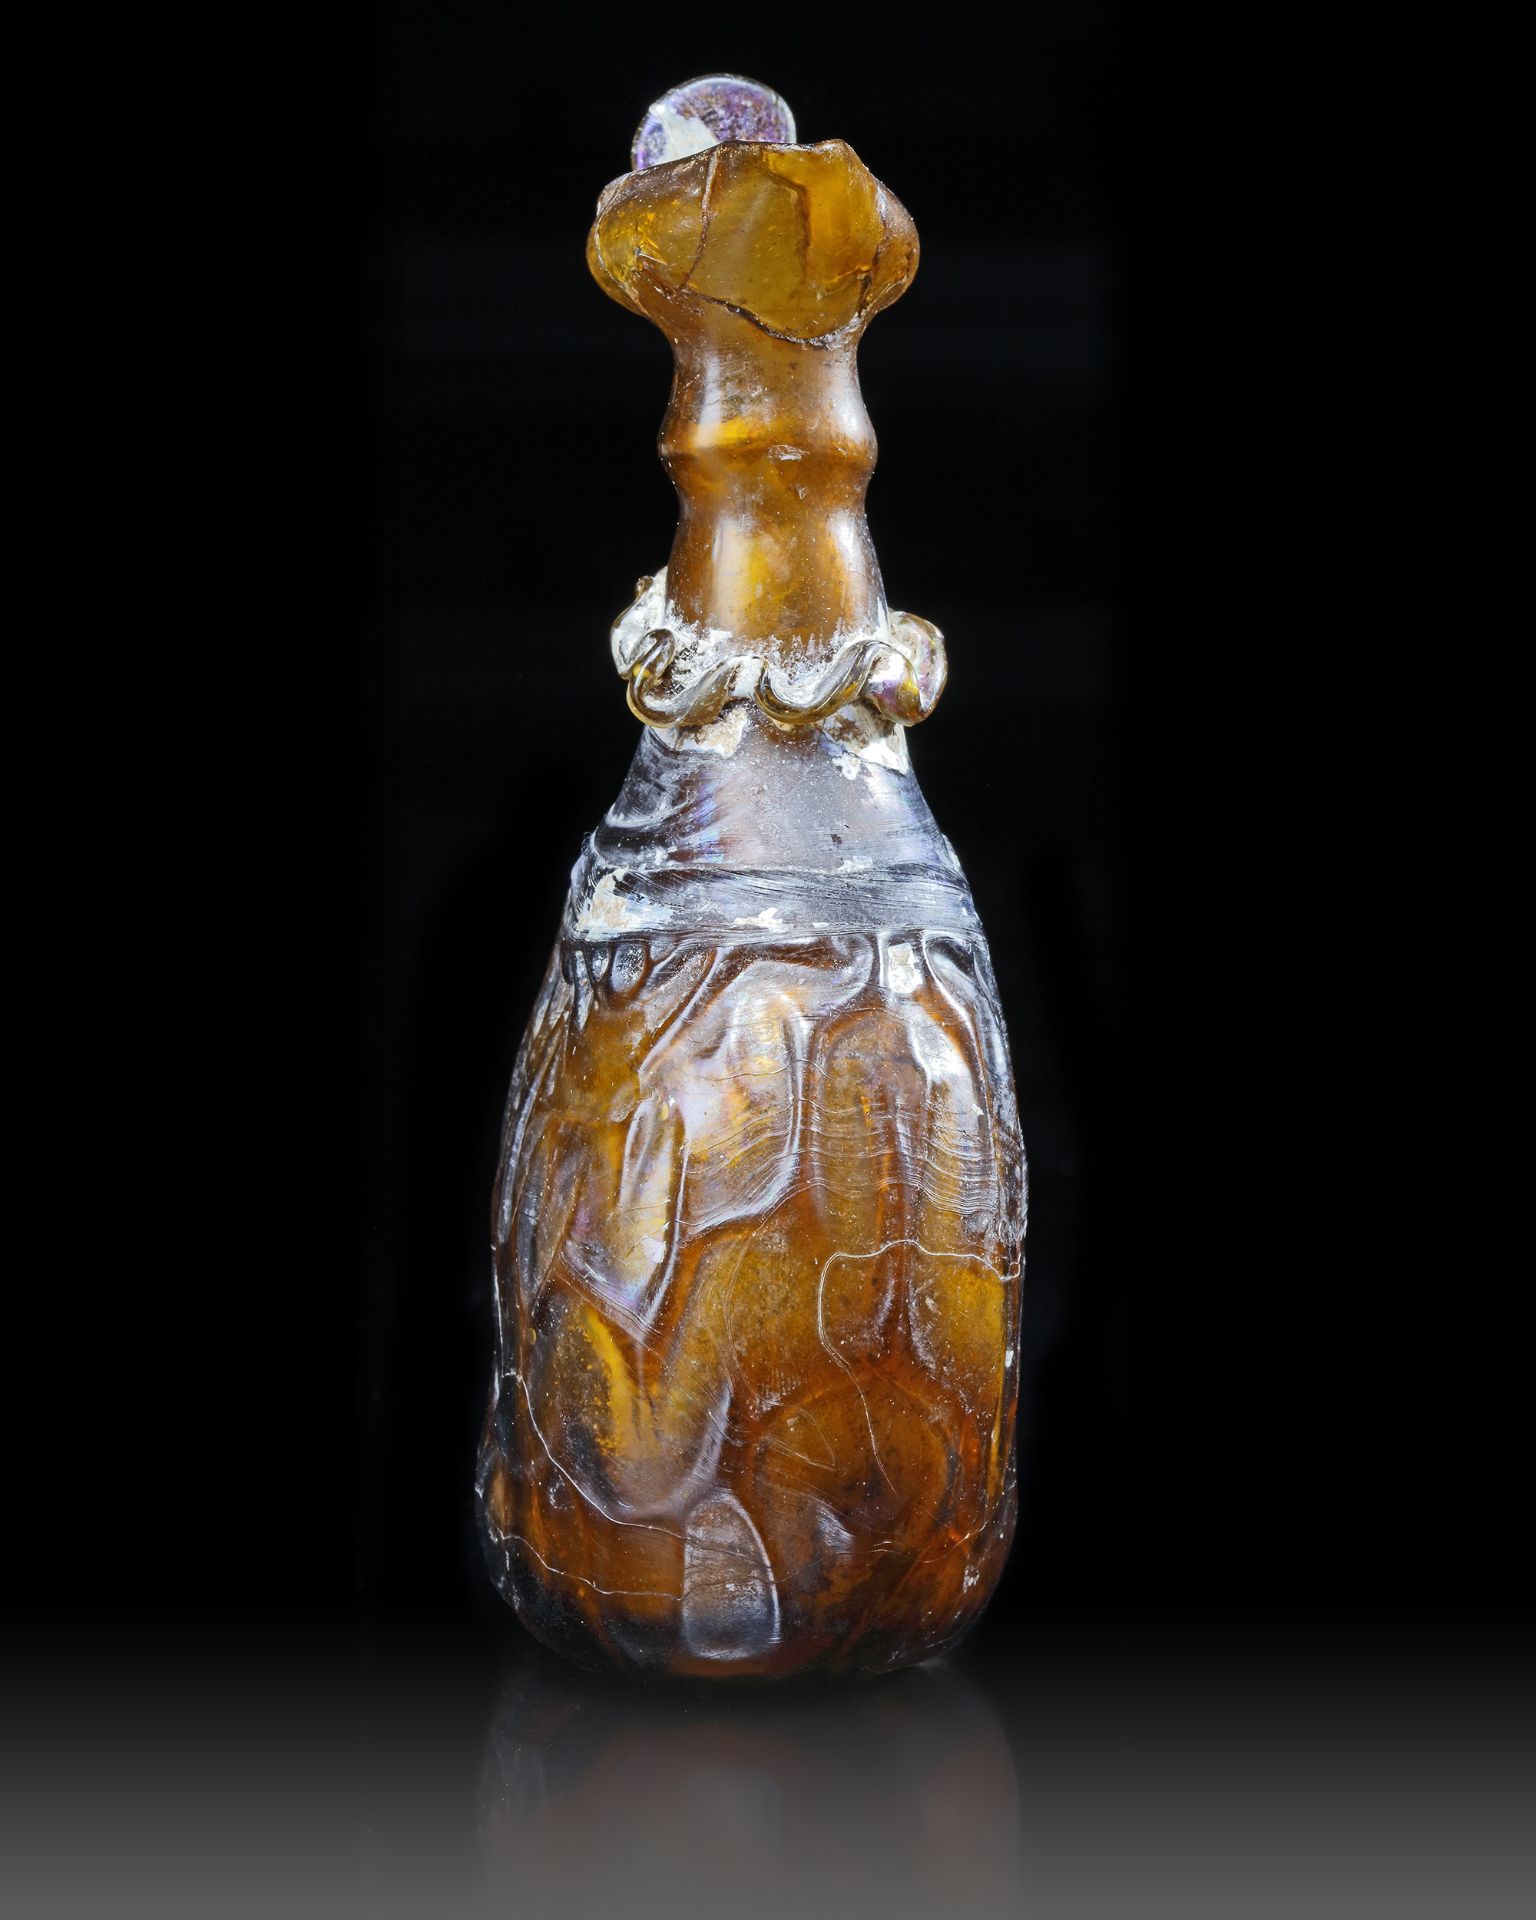 AN AMBER GLASS JUG, PERSIA, 10TH-11TH CENTURY - Image 4 of 5